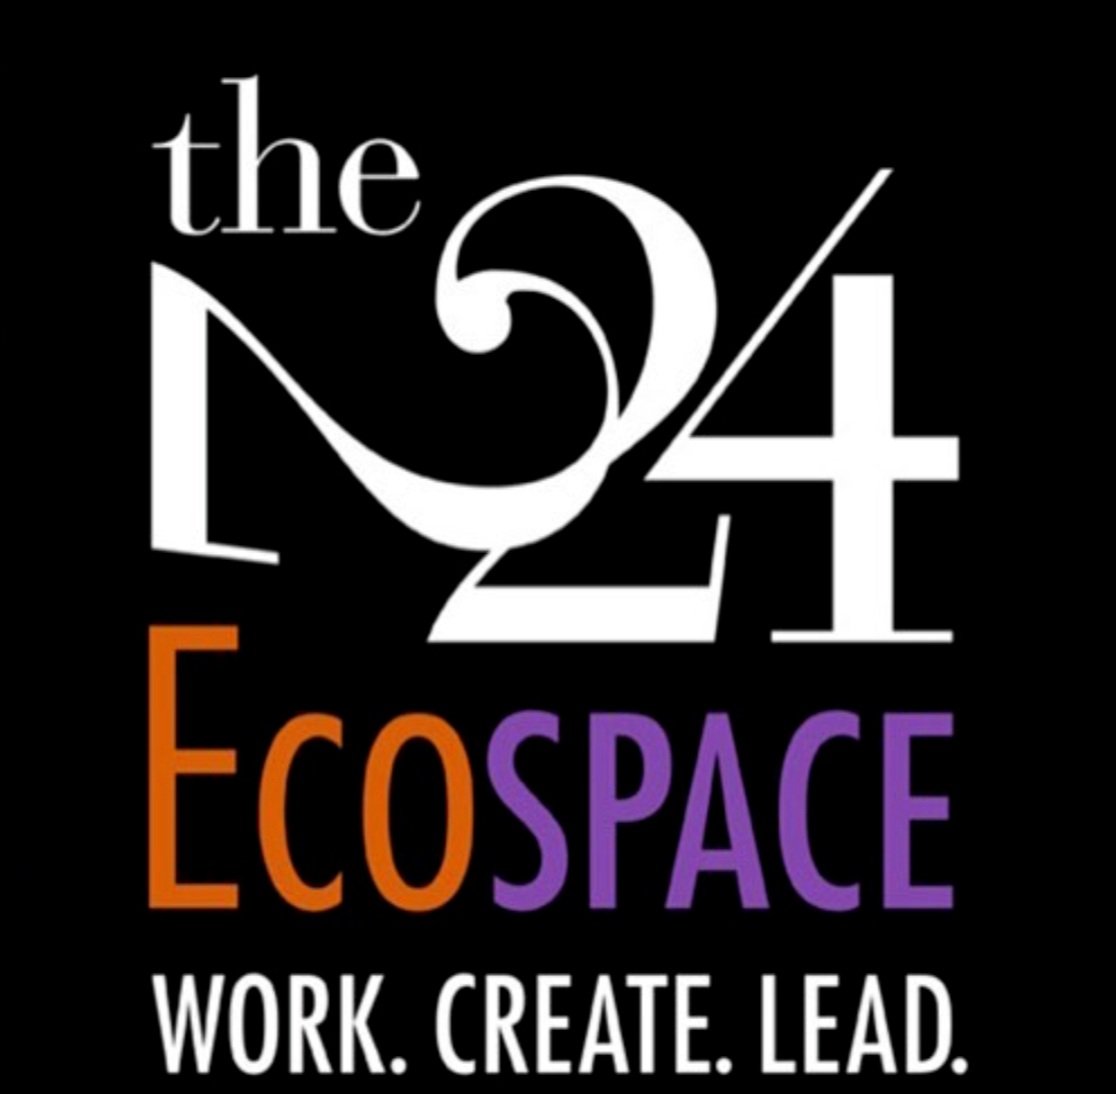 The 224 Ecospace